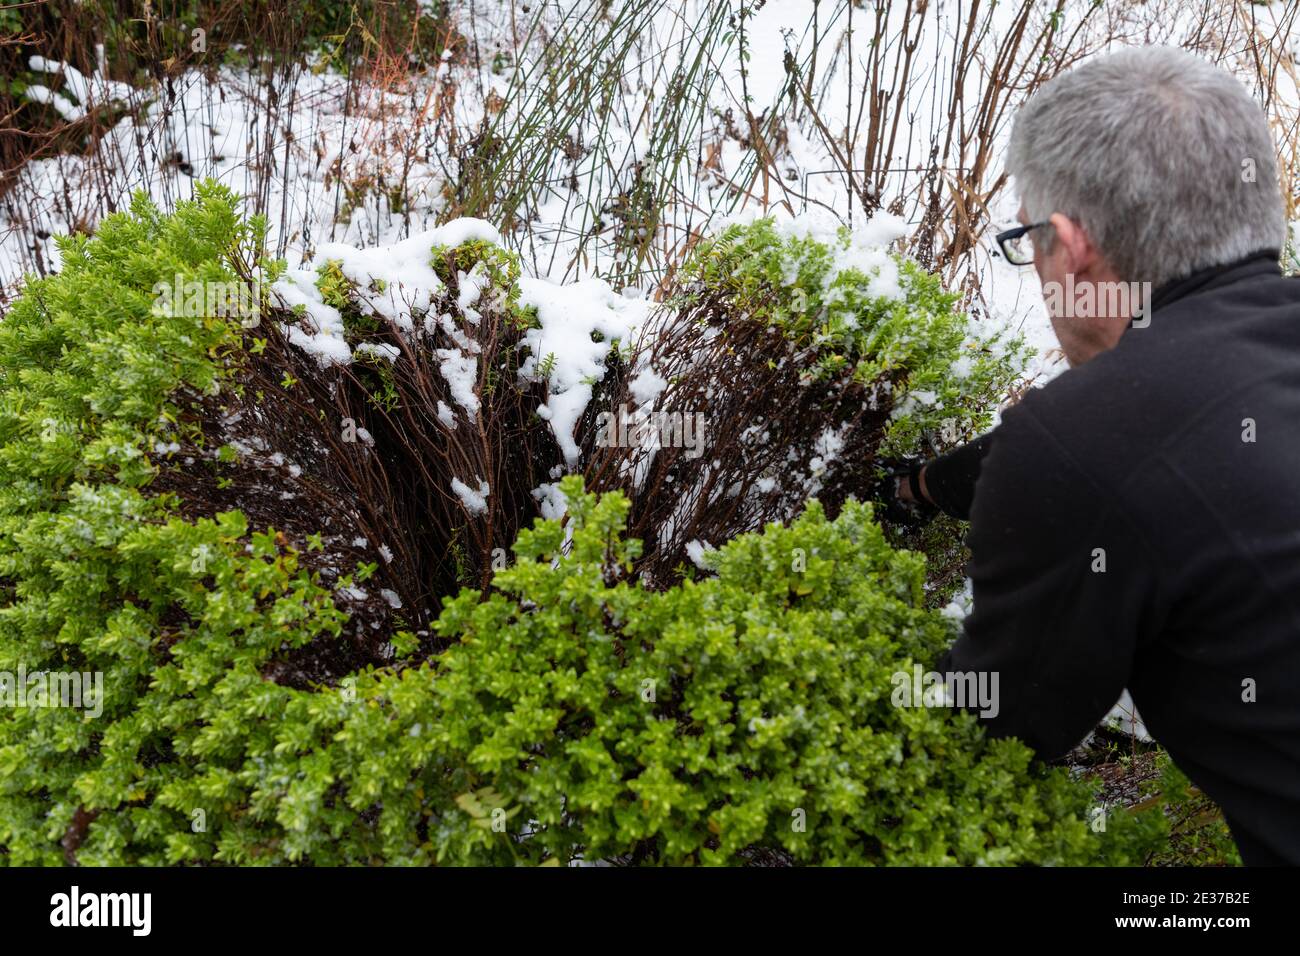 male gardener shaking brushing snow off hebe shrub that has been flattened and splayed open by the weight of snow and ice - Scotland, UK - see 2E37B30 Stock Photo